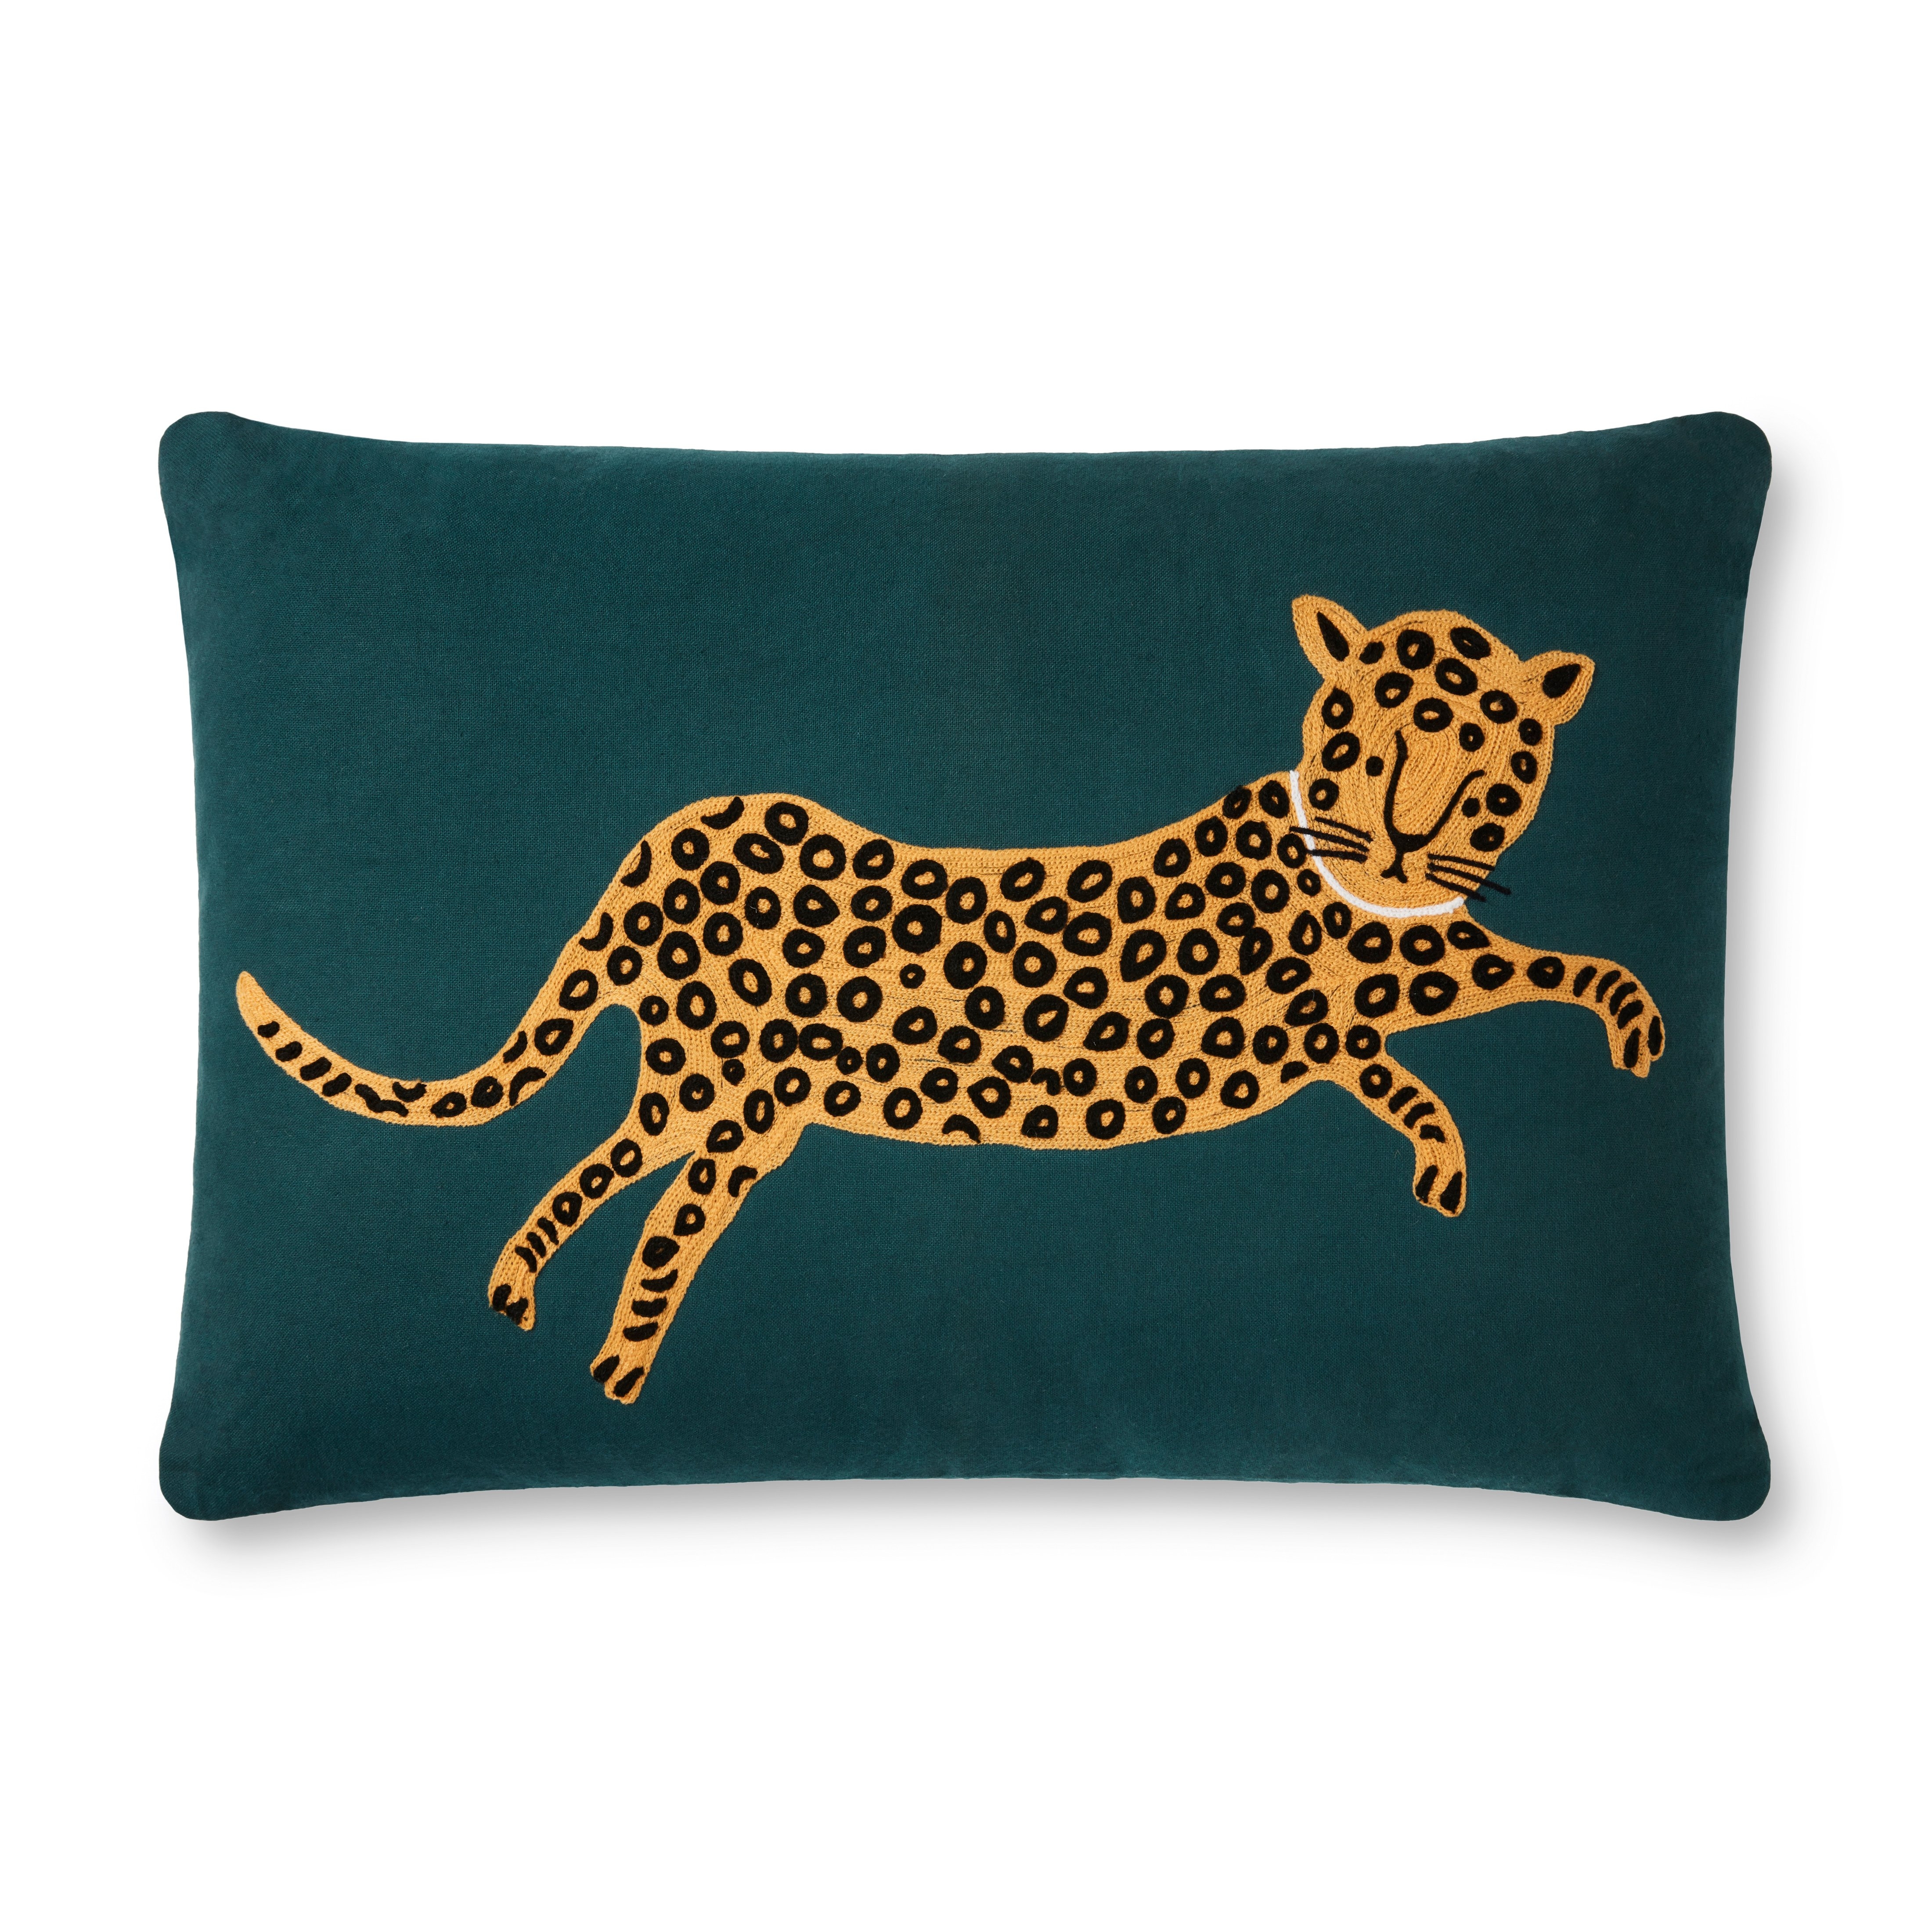 Rifle Paper Co. x Loloi PILLOWS P6055 TEAL / GOLD 16" x 26" Cover Only - Image 0